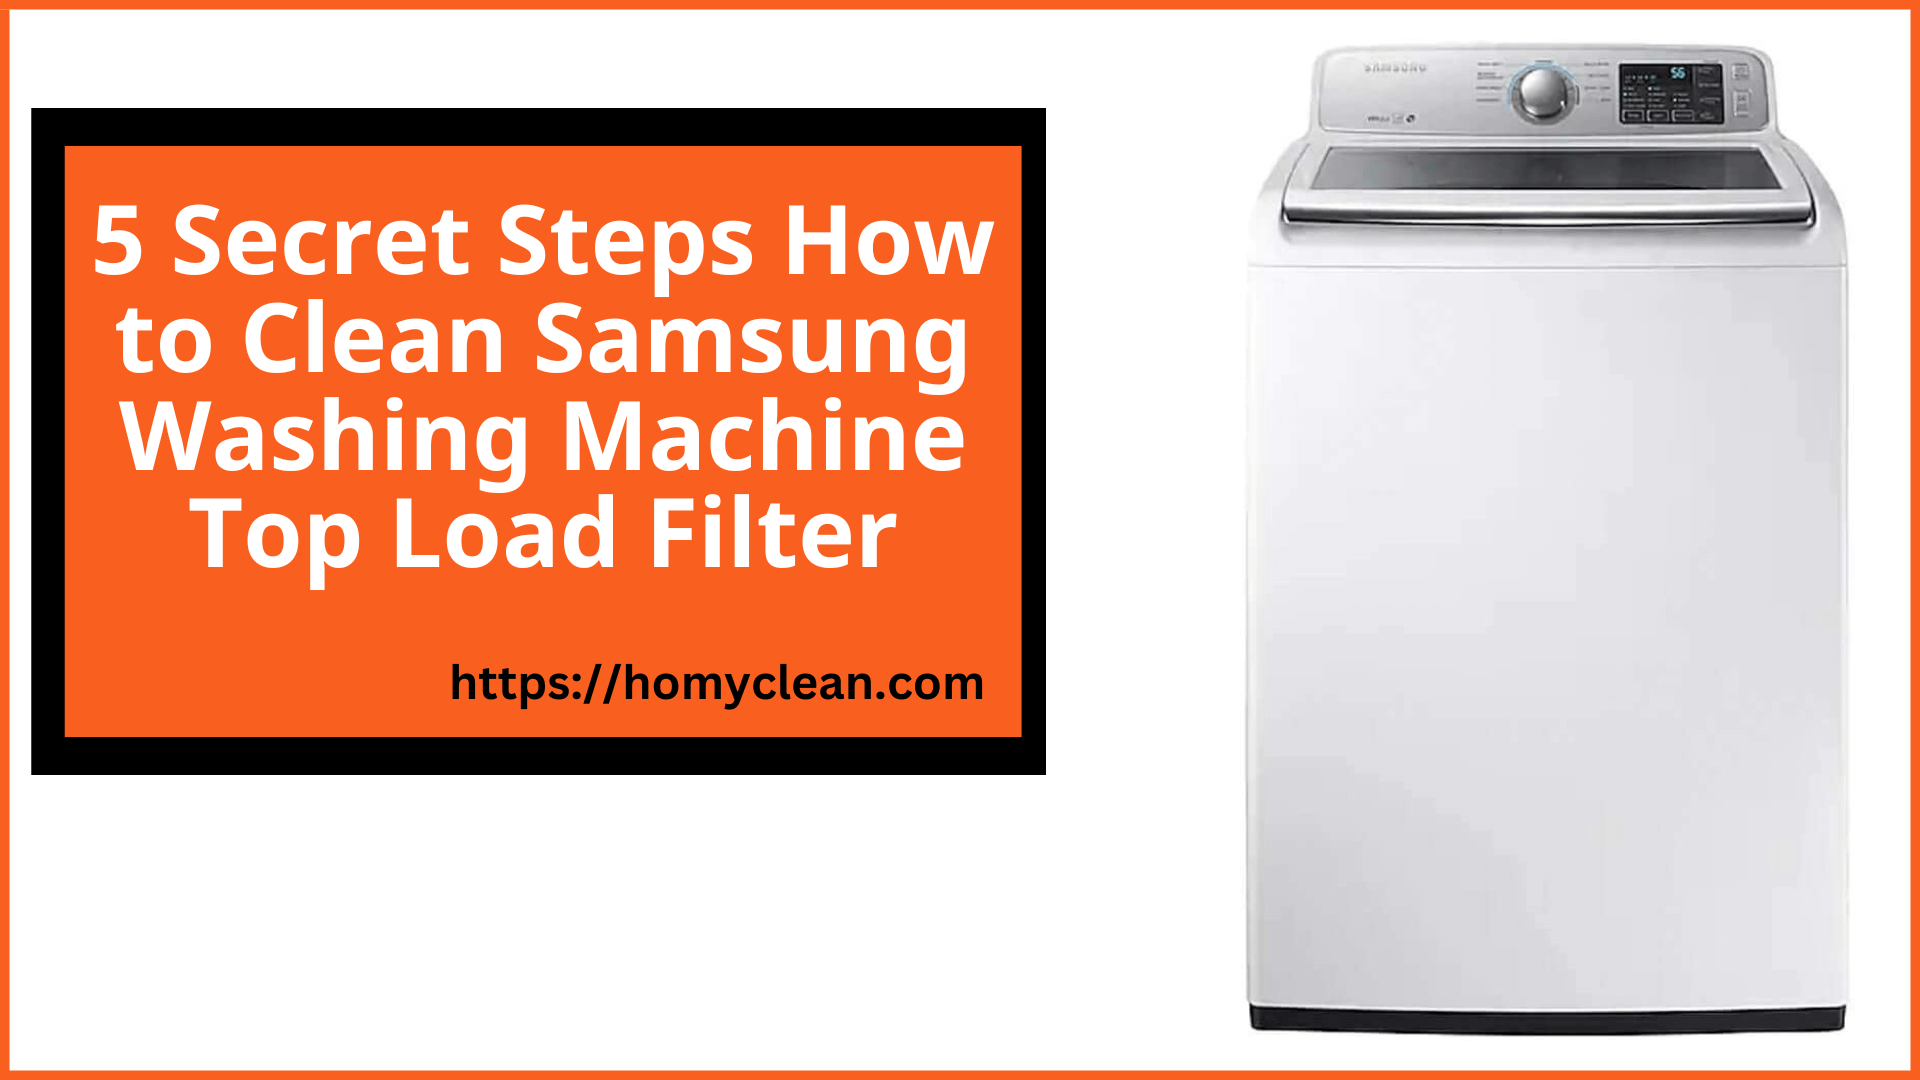 How to Clean Filter of Samsung Top Load Washing Machine